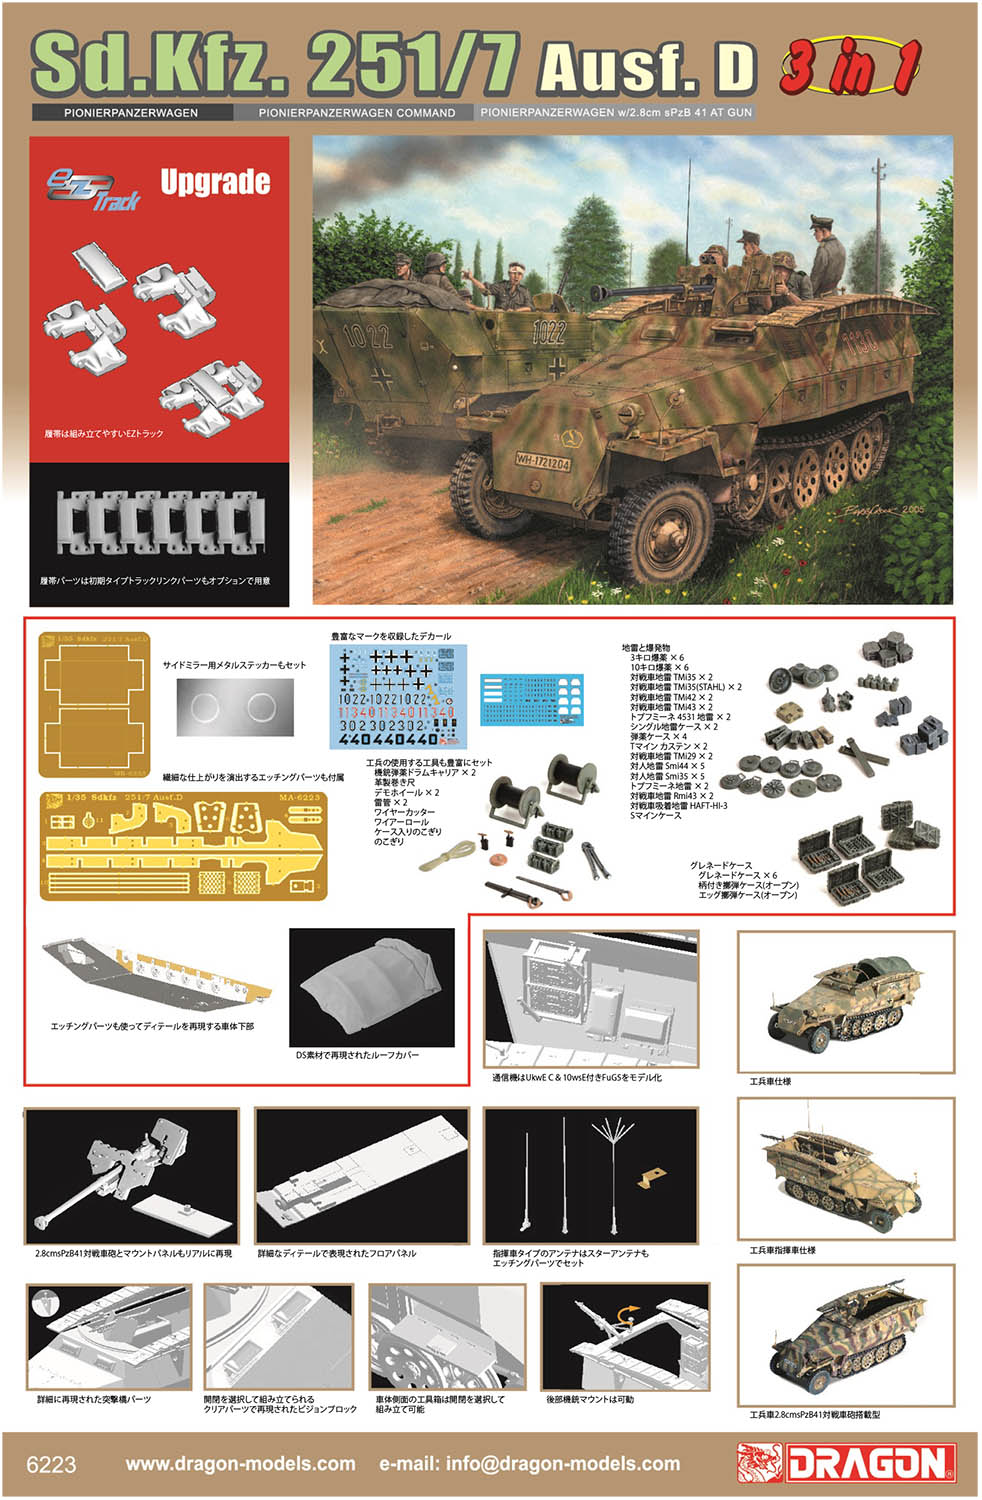 1/35 WWII ドイツ軍 Sd.Kfz251/7 Ausf.D 装甲工兵車 EZトラック付属 (3in1)